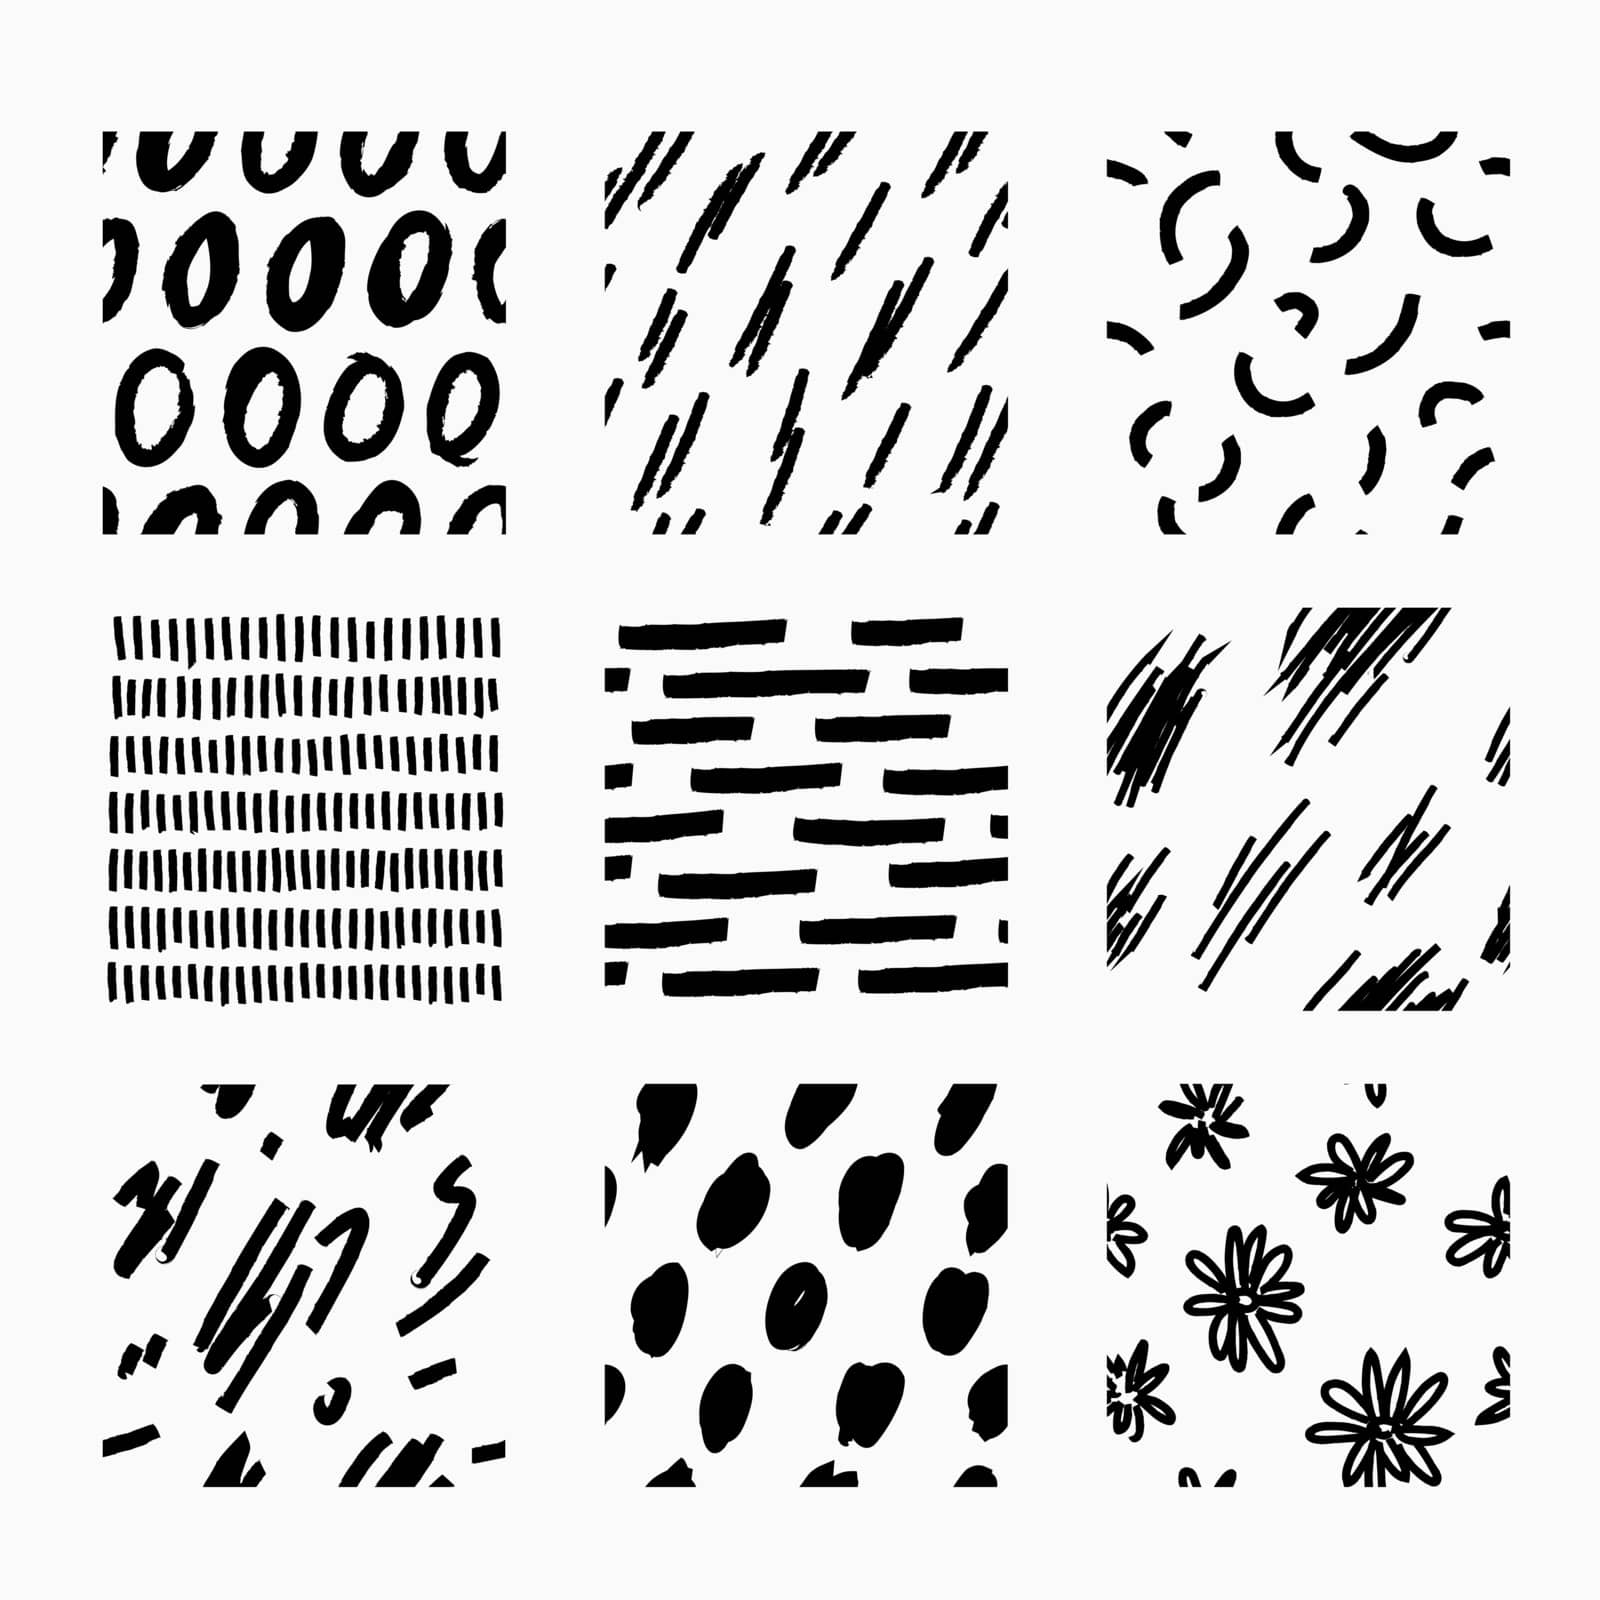 Freehand vector pattern swatch set by ersp